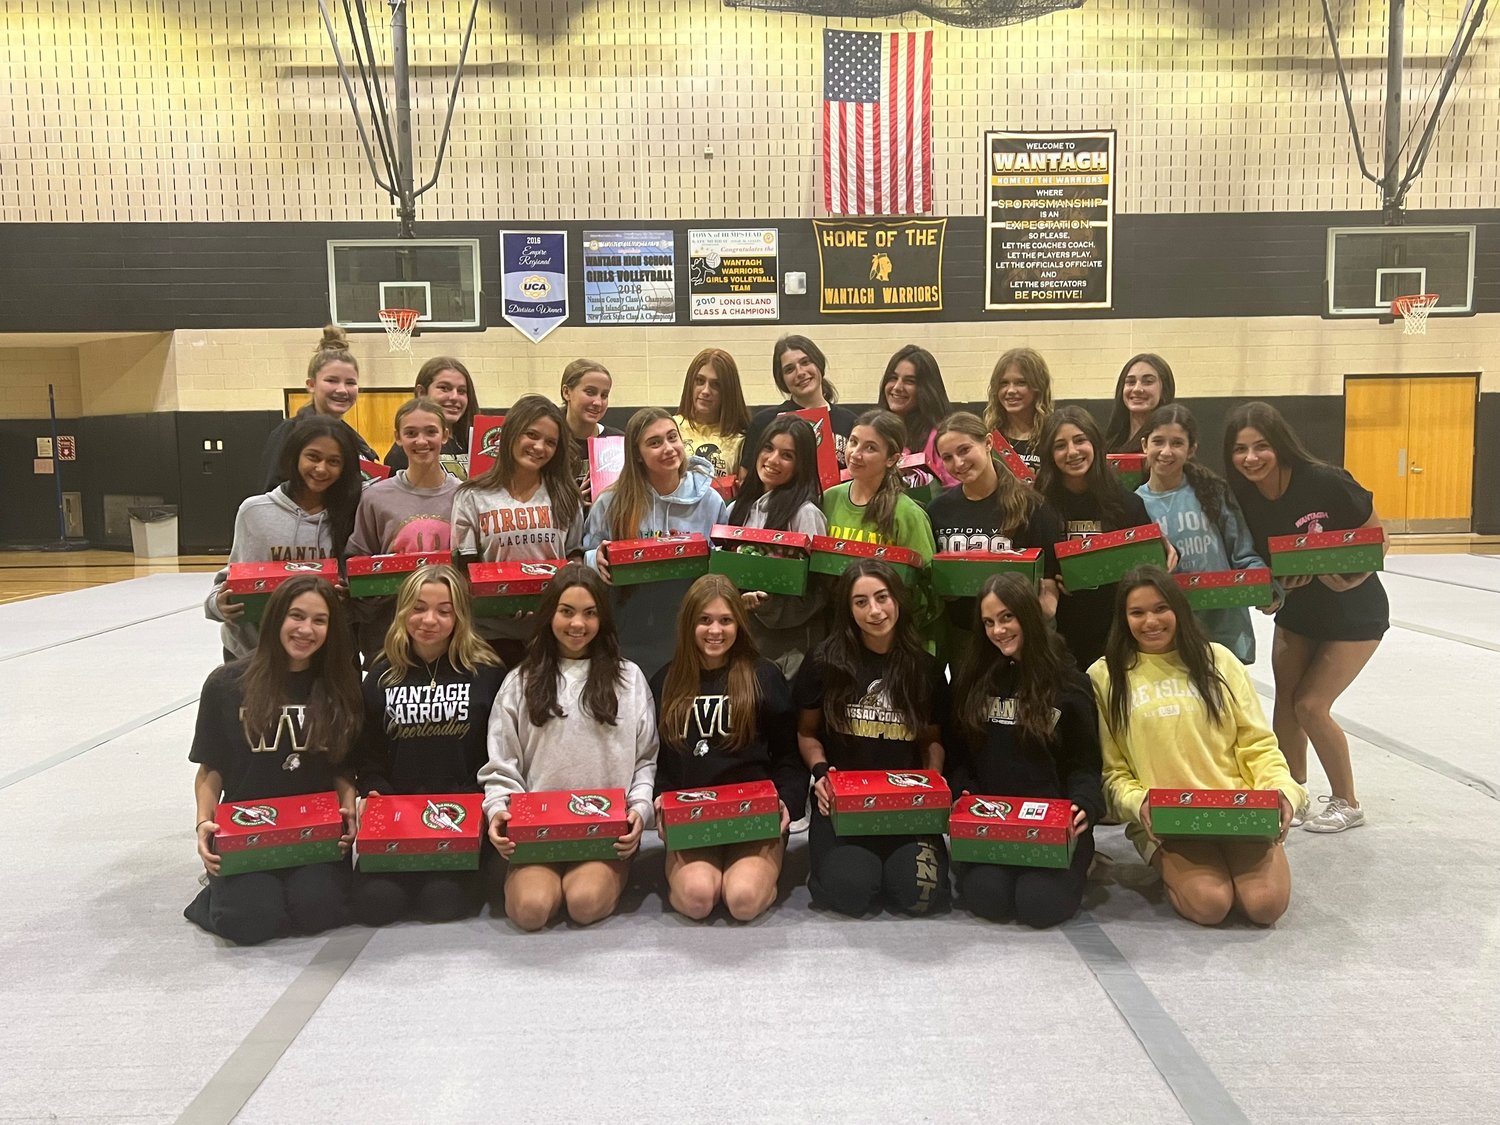 The Wantagh High School cheerleading team takes part in Samaritan’s Purse, a Christmas toy drive for children, every year. This year, sophomore Kayla Spisto, middle row, third from left, took the drive to new heights.